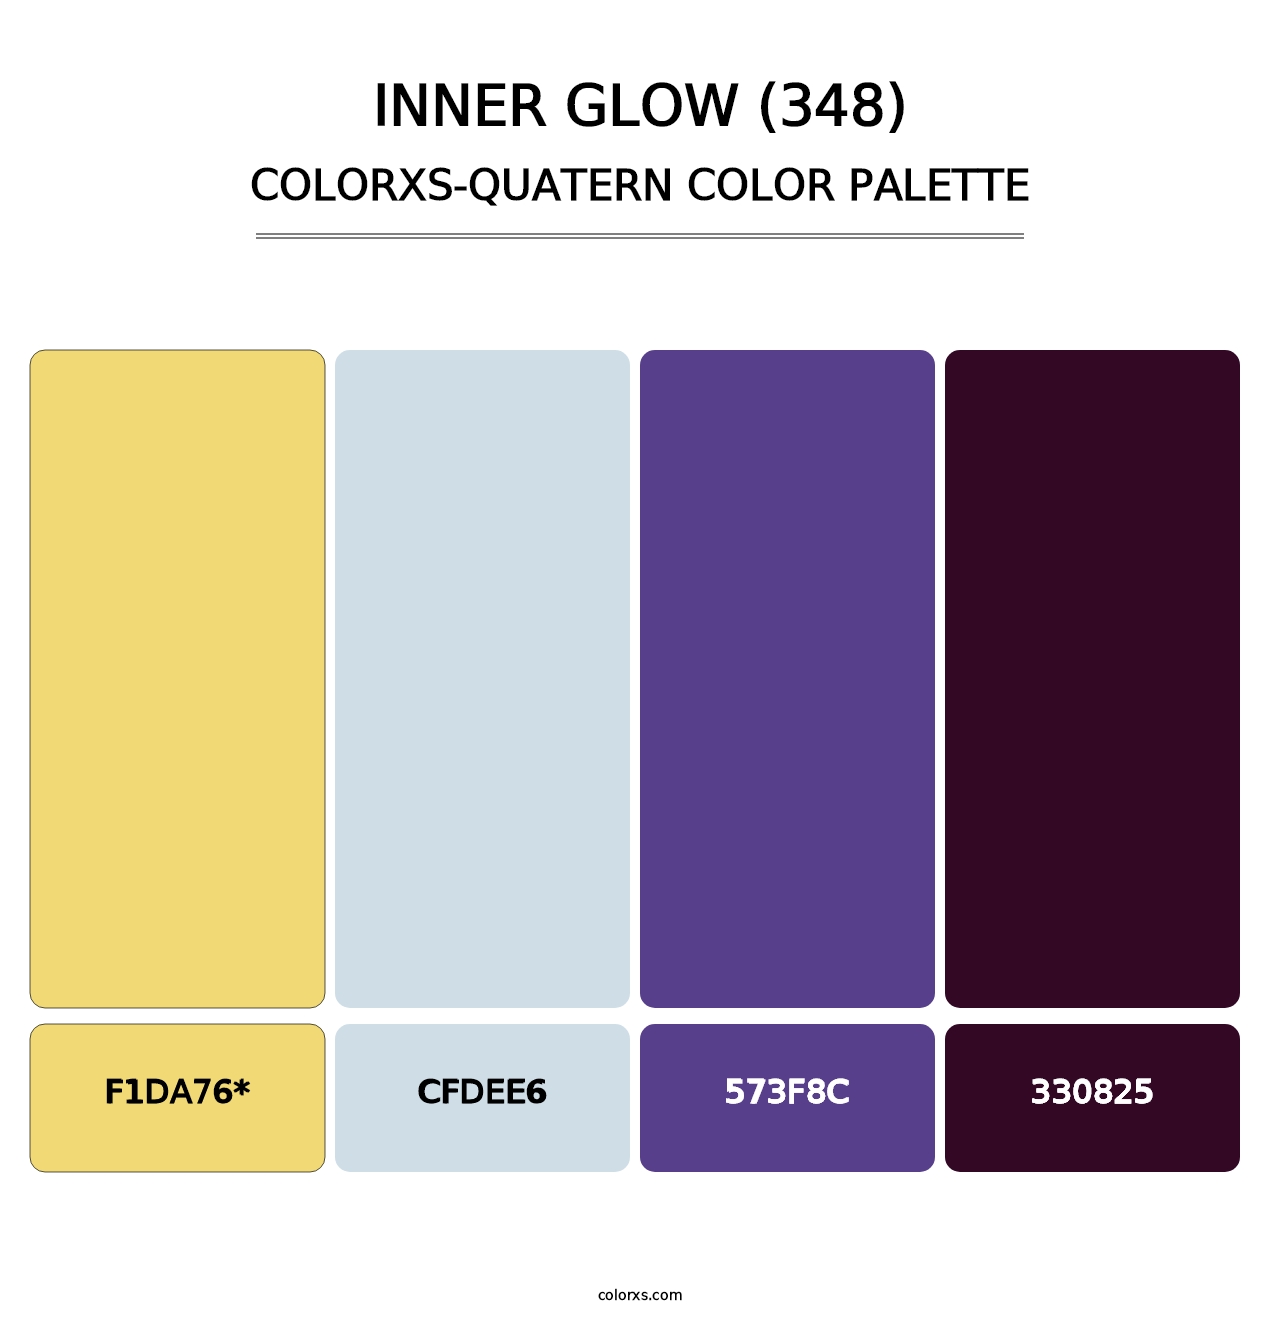 Inner Glow (348) - Colorxs Quatern Palette